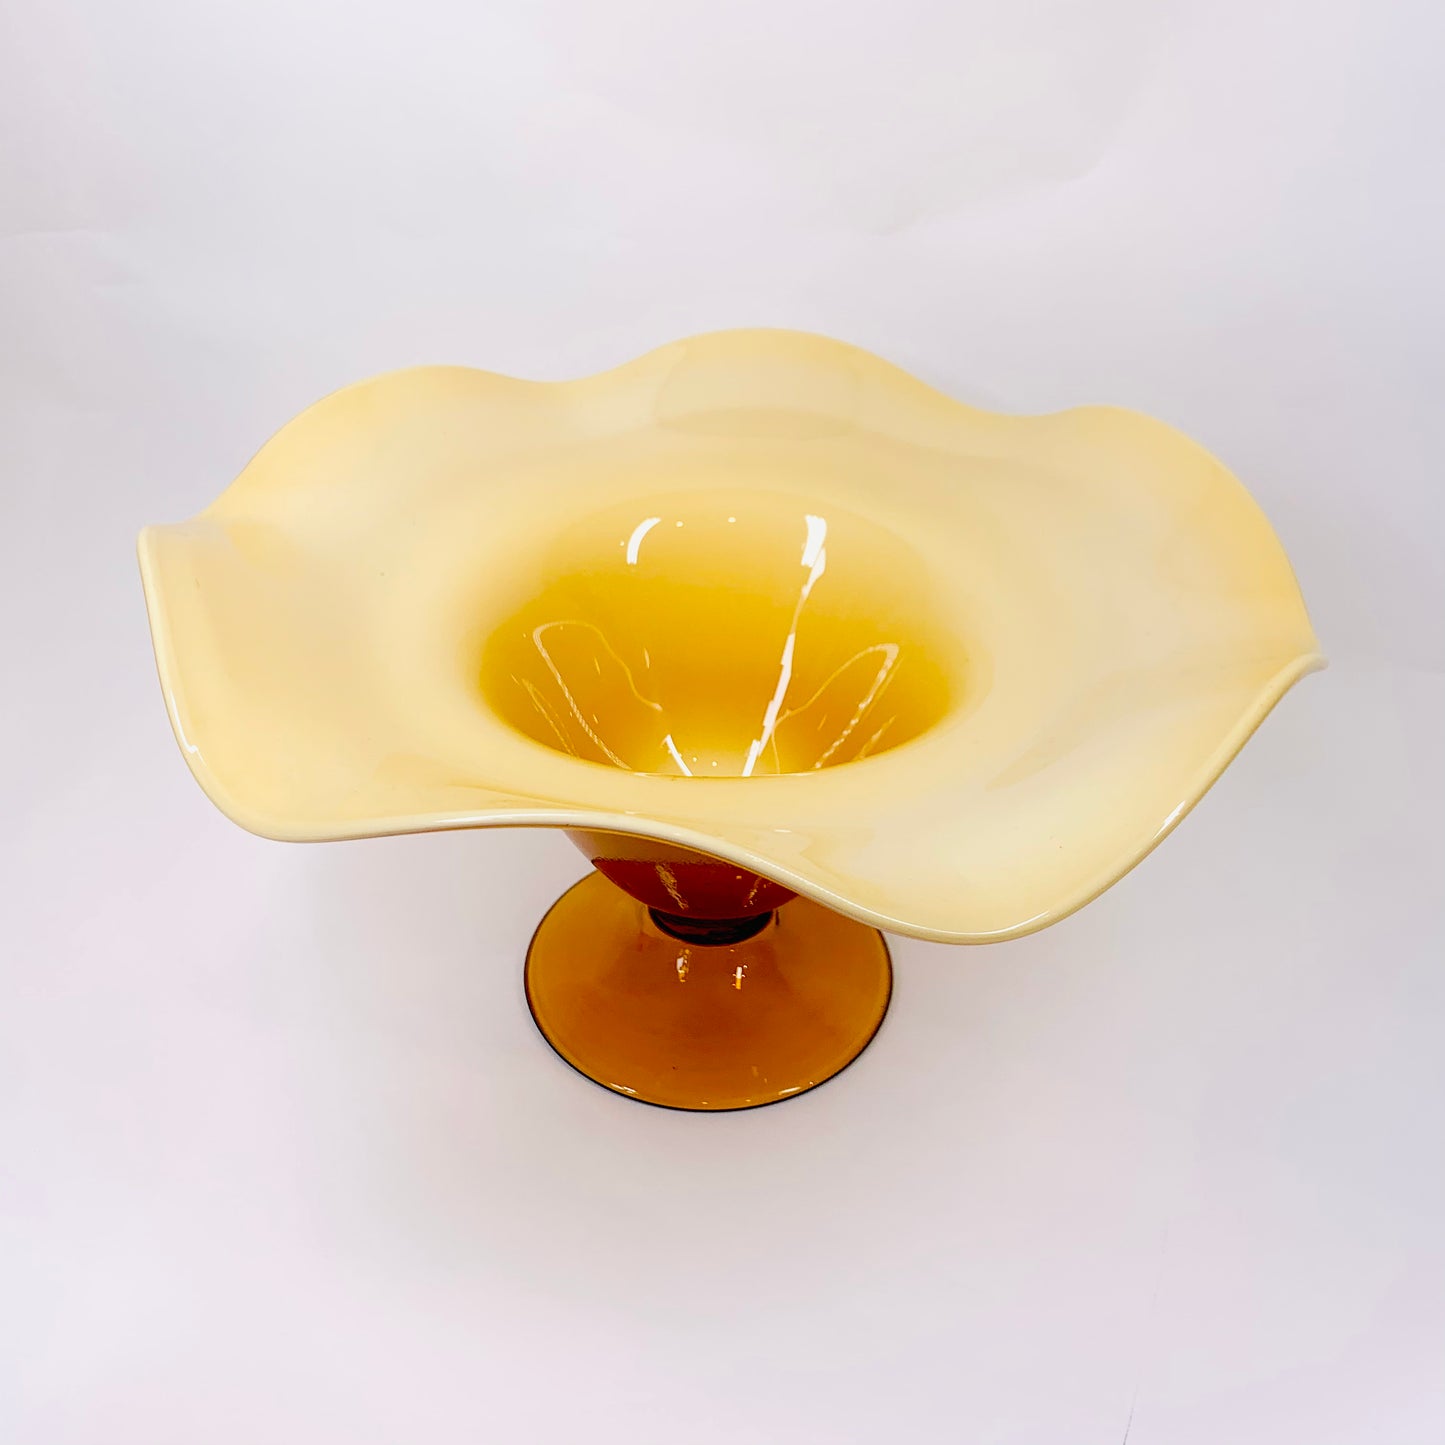 Large Italian Midcentury cased amber glass comport/footed fruit bowl with ruffle rim